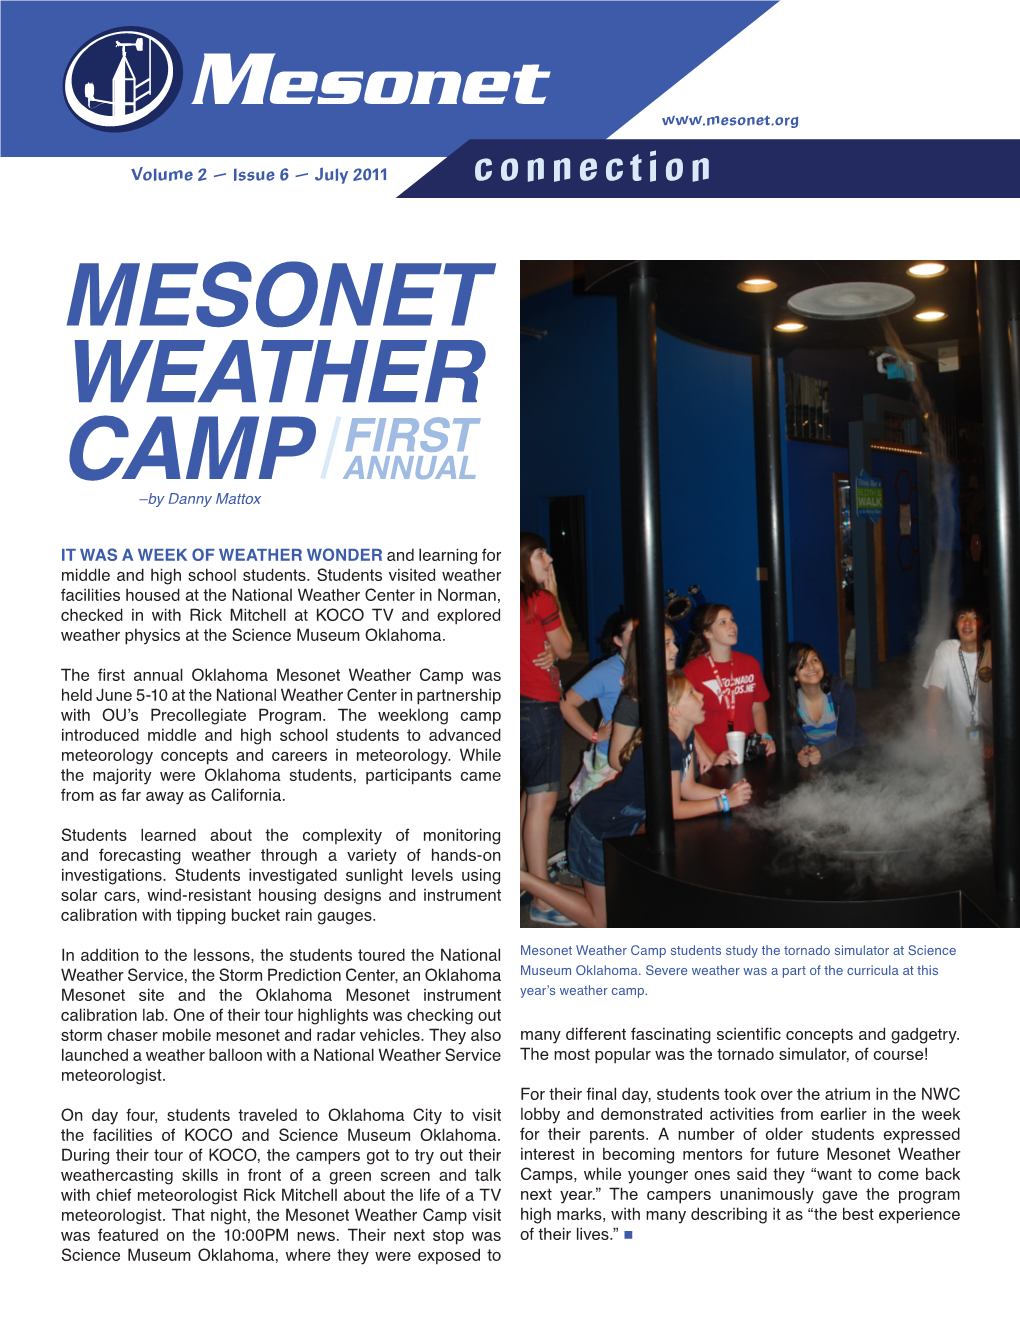 Mesonet Weather Camp Was Held June 5-10 at the National Weather Center in Partnership with OU’S Precollegiate Program